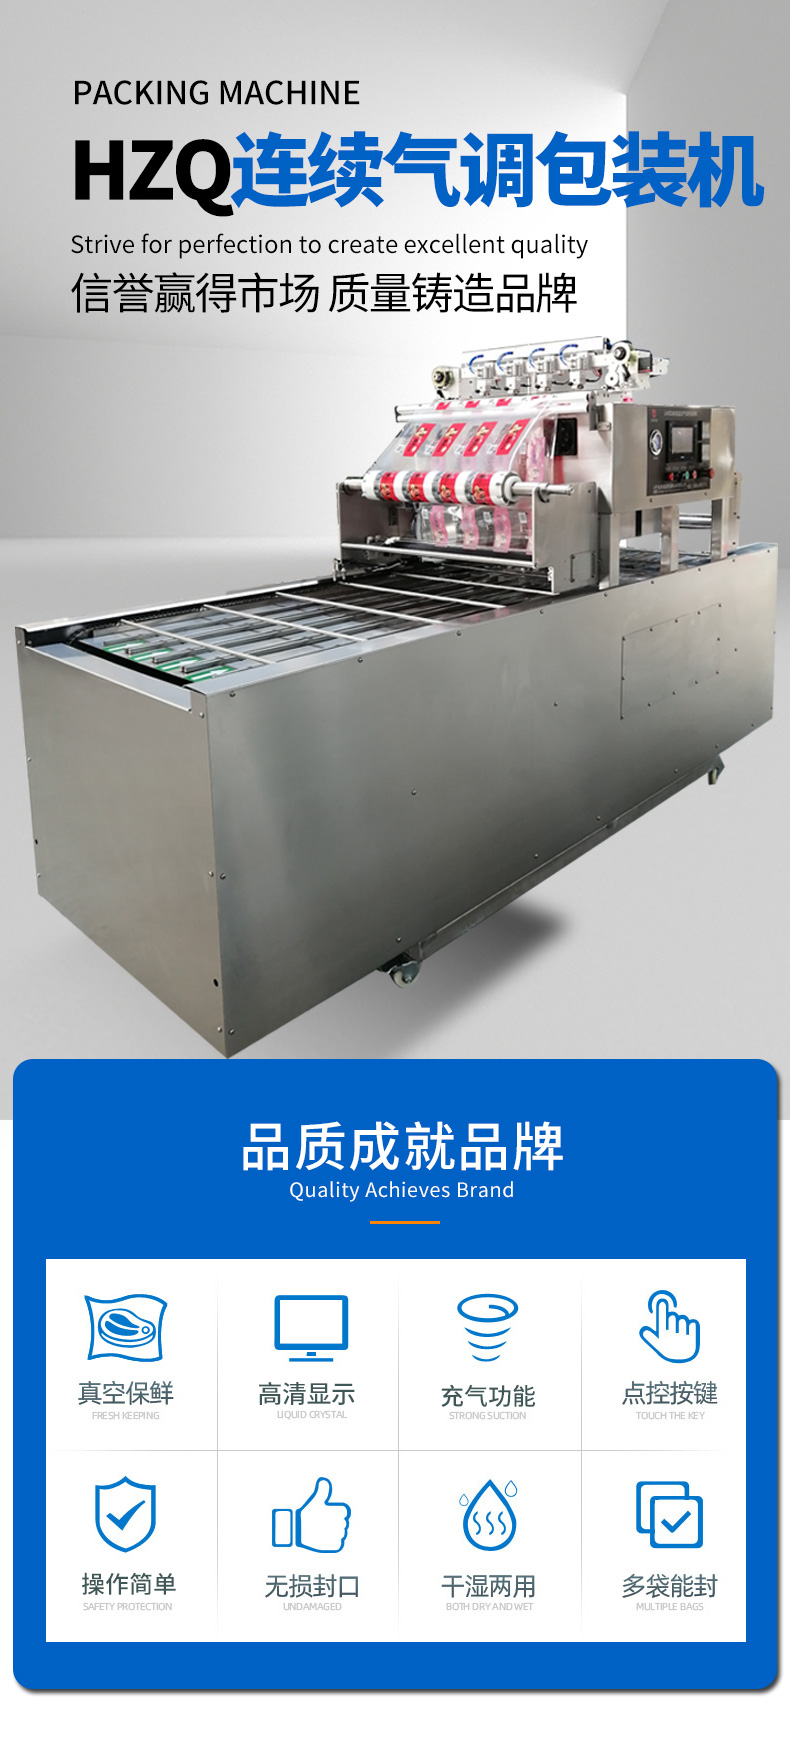 Yongliang Brand Fruit and Vegetable Composite Material Continuous Modified Atmosphere Packaging Machine Prefabricated Vegetables Fully Automatic Box Vacuum Sealing Machine